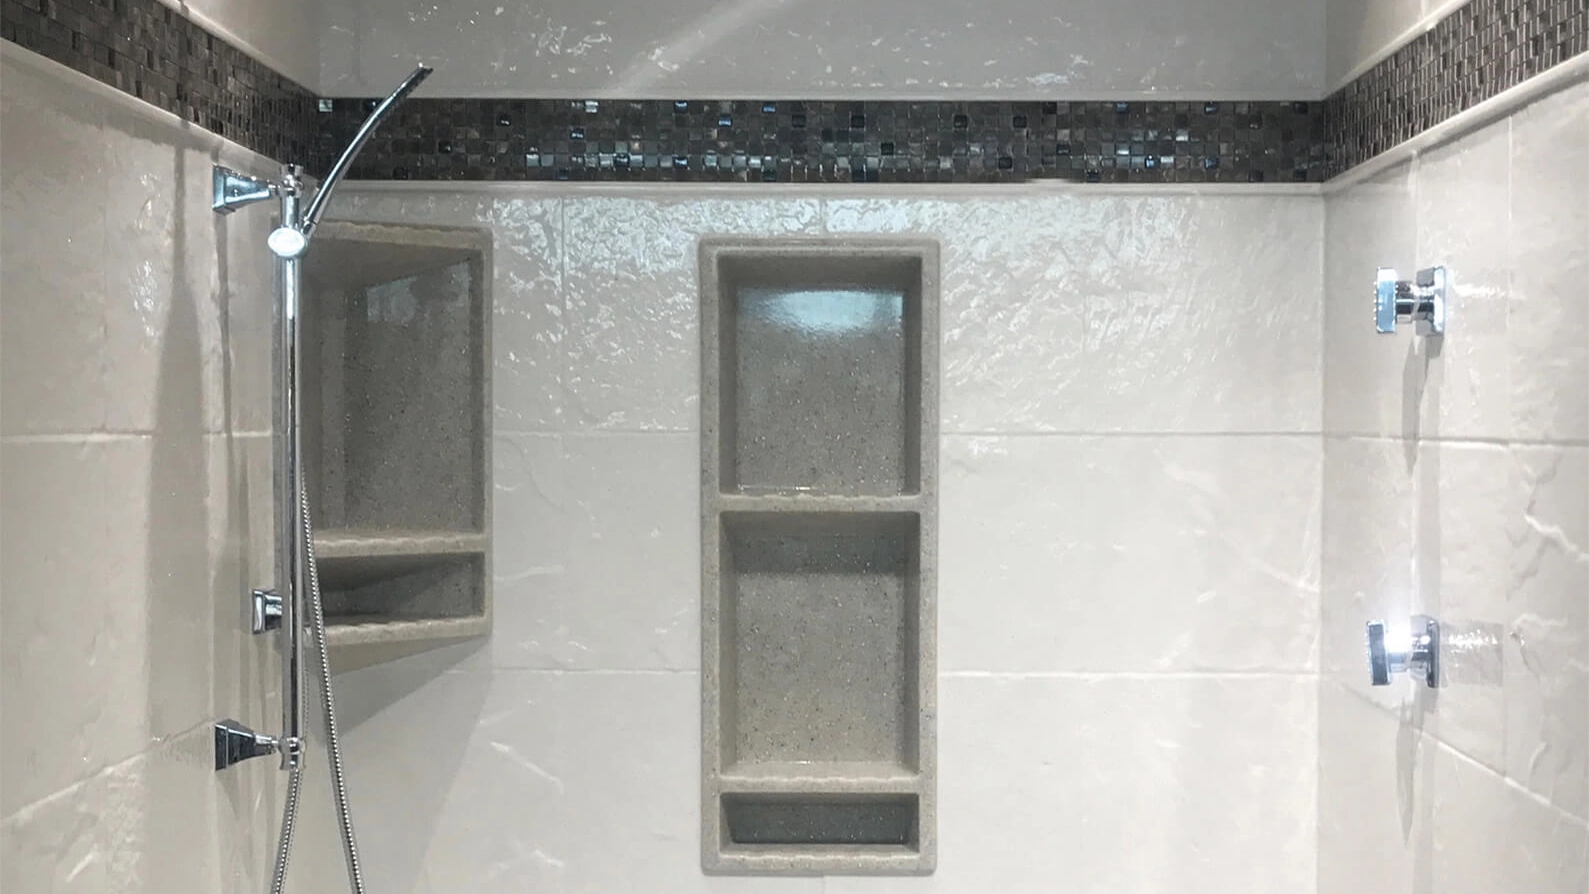 Modern Onyx shower with sleek wall-mounted faucets and integrated shelving against a tiled background with decorative mosaic accent.